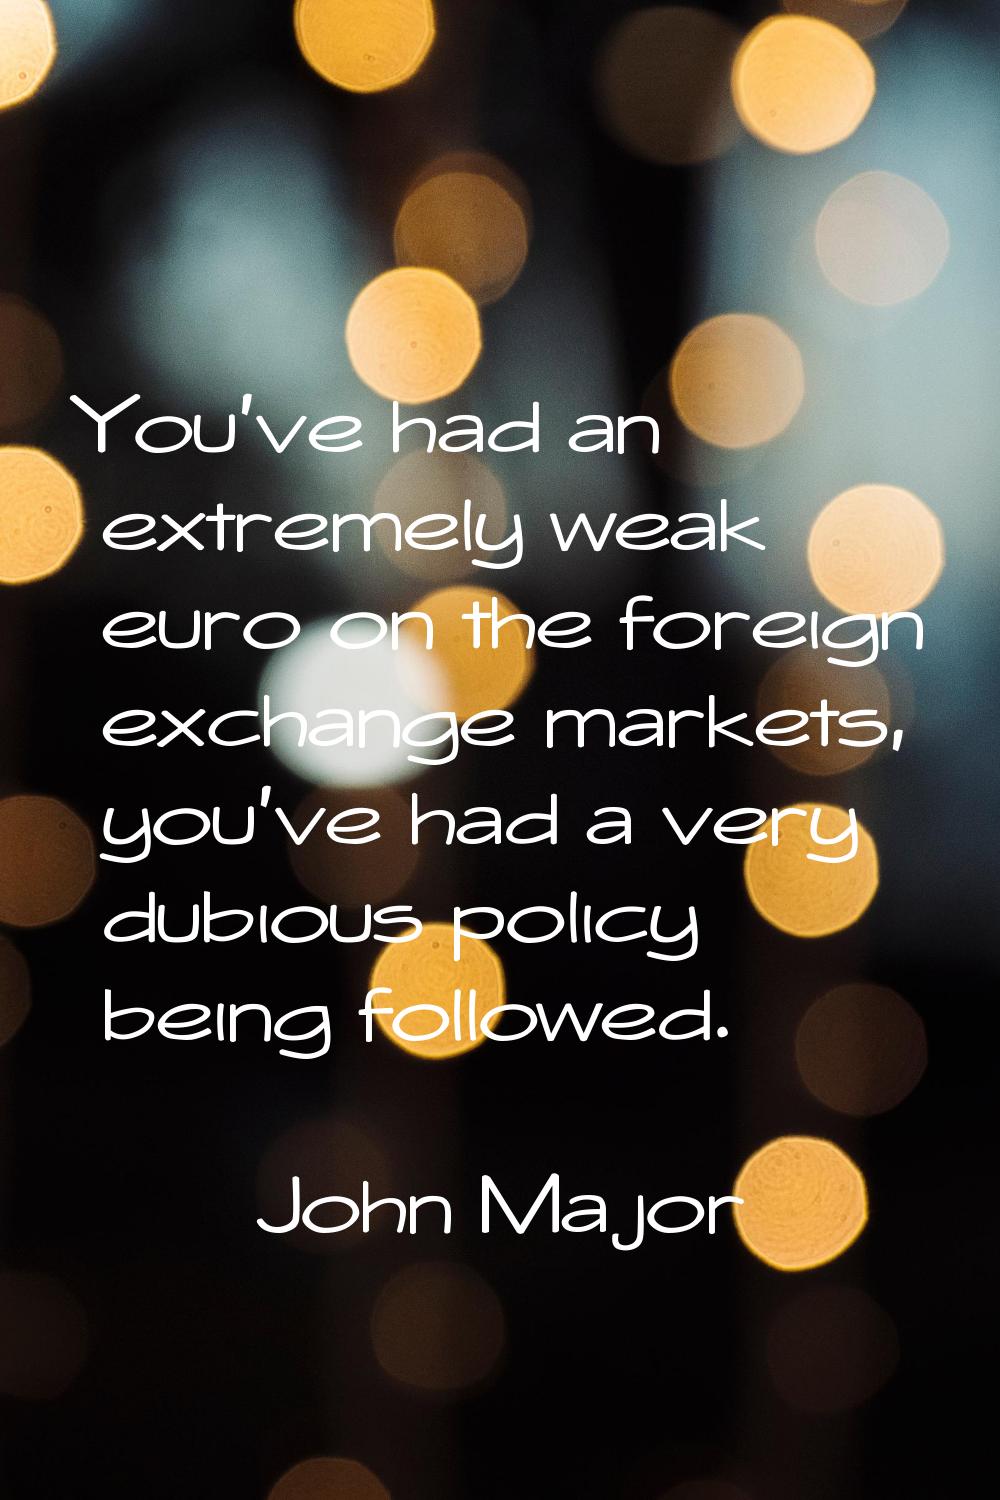 You've had an extremely weak euro on the foreign exchange markets, you've had a very dubious policy